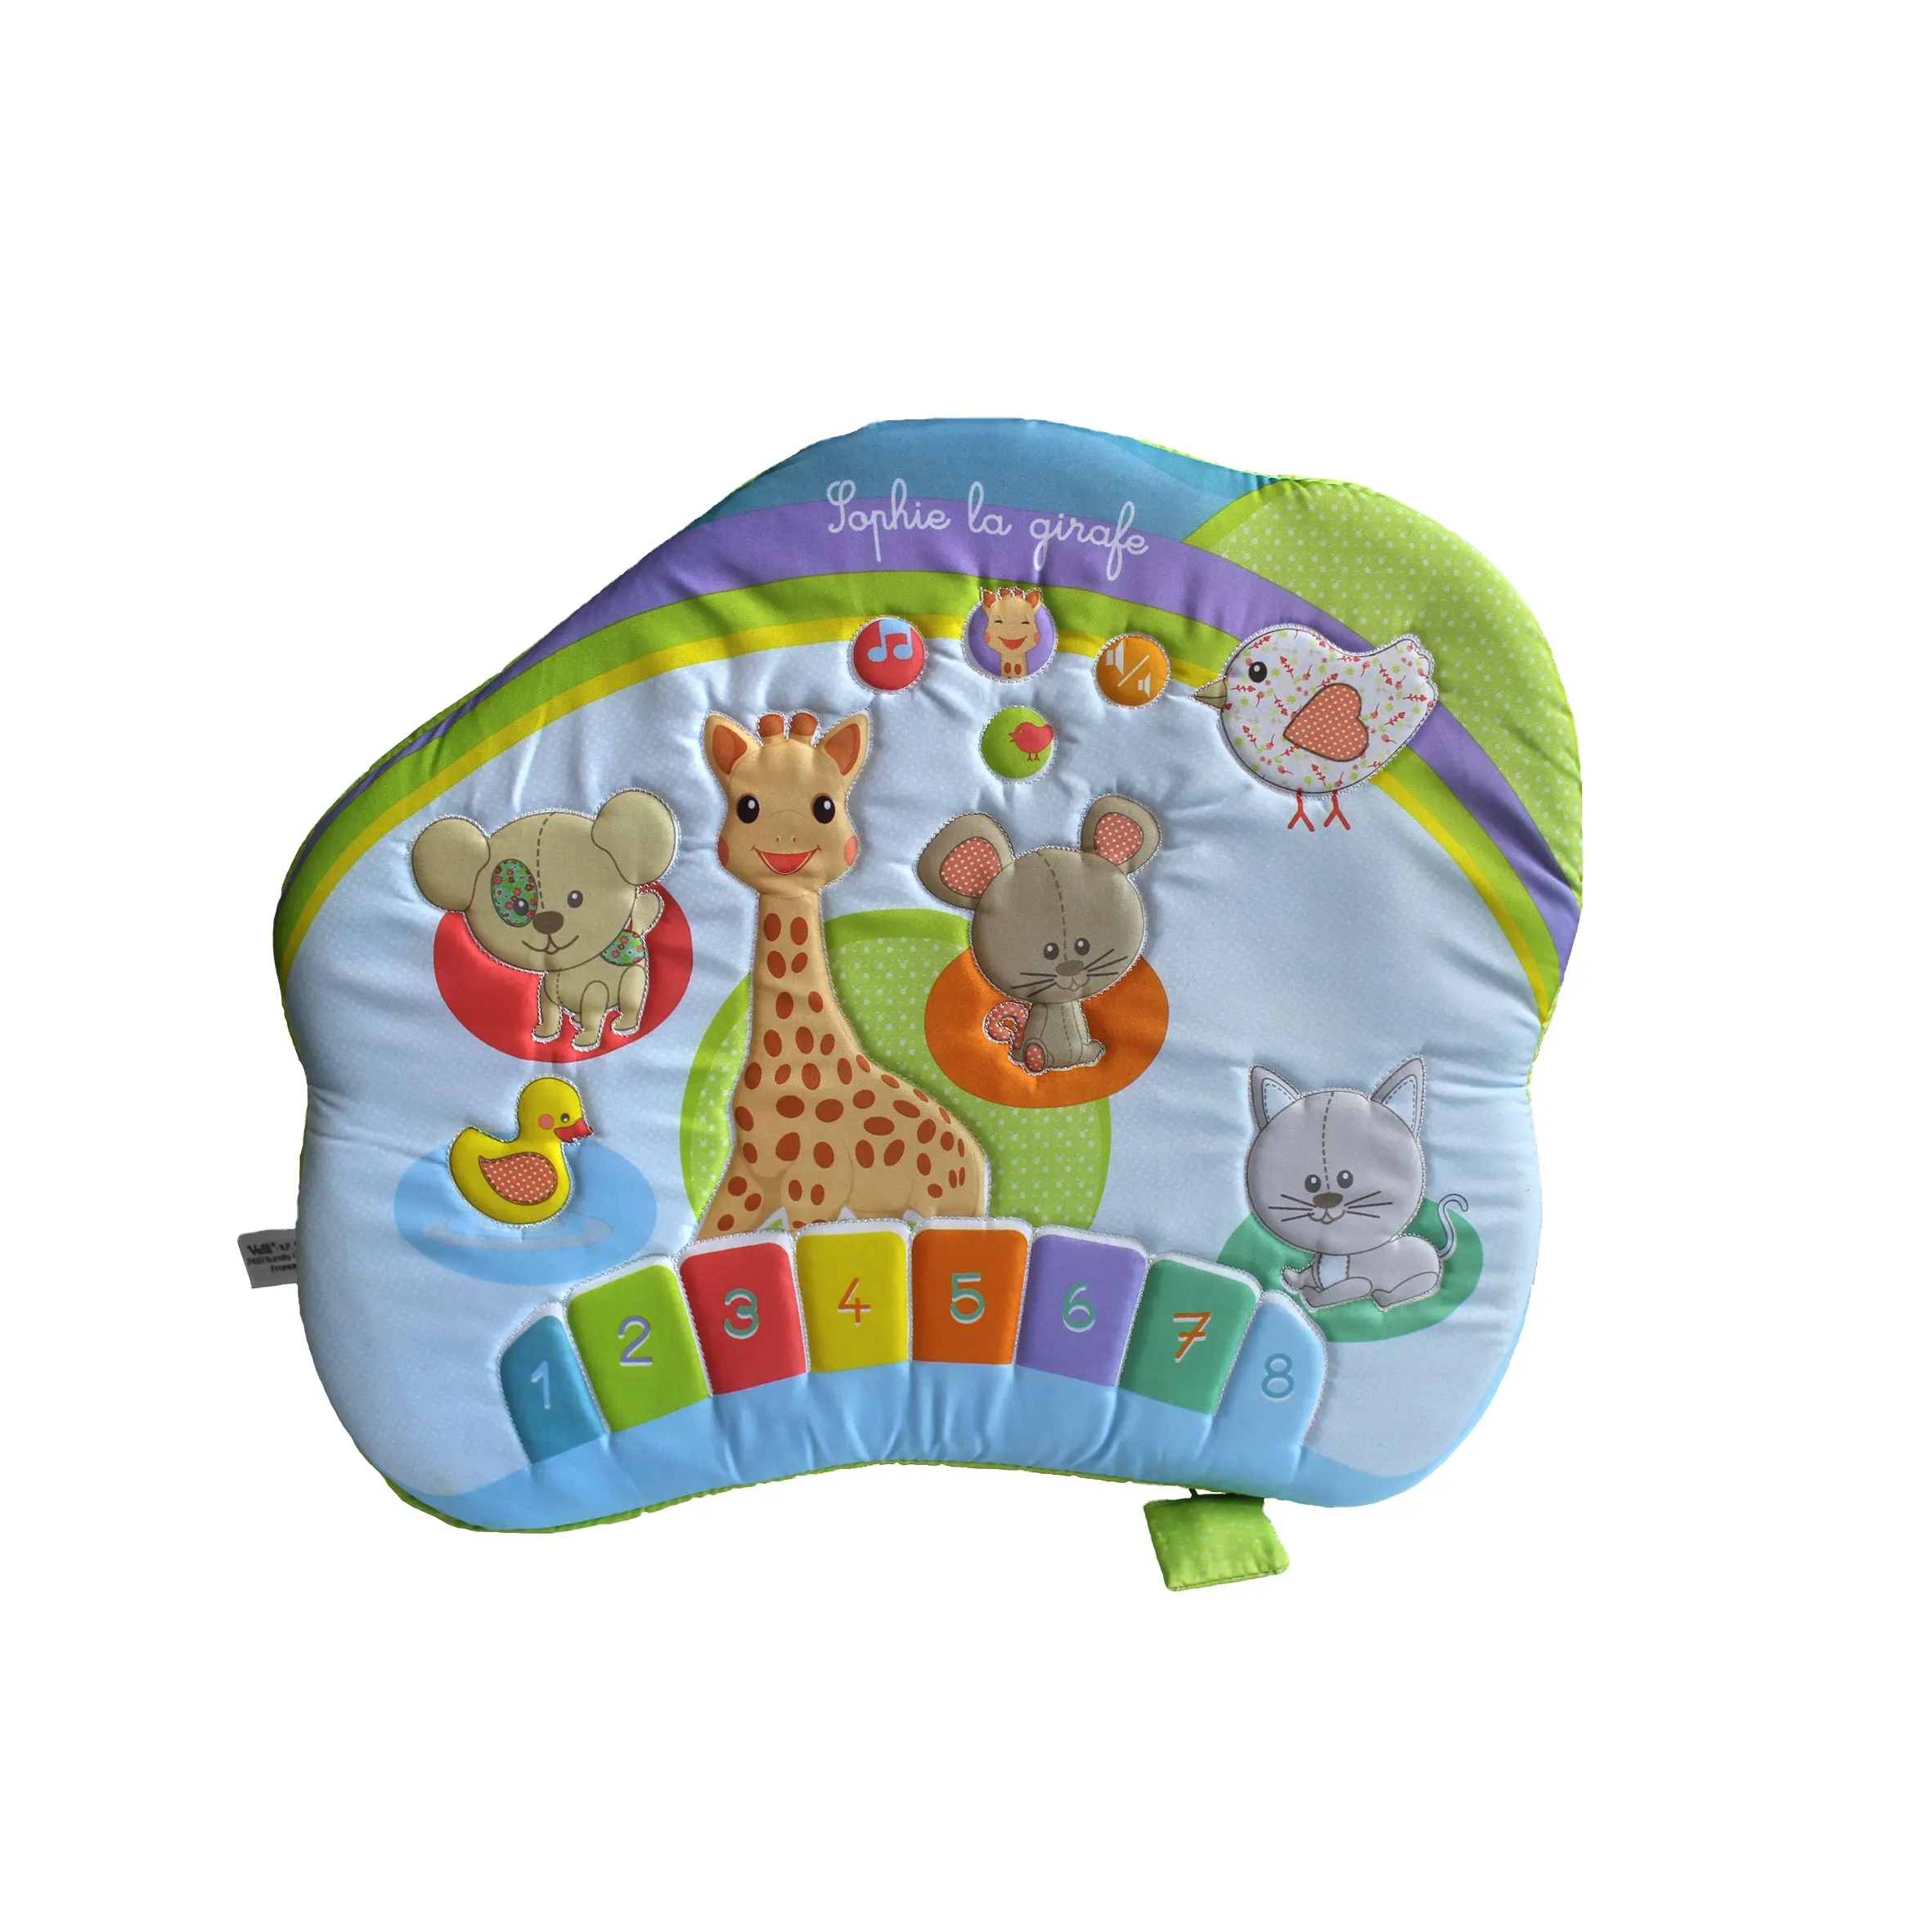 Cartoon Bear Kids Musical Soft Plush Piano Keyboard Touch Early Education Toys for Children